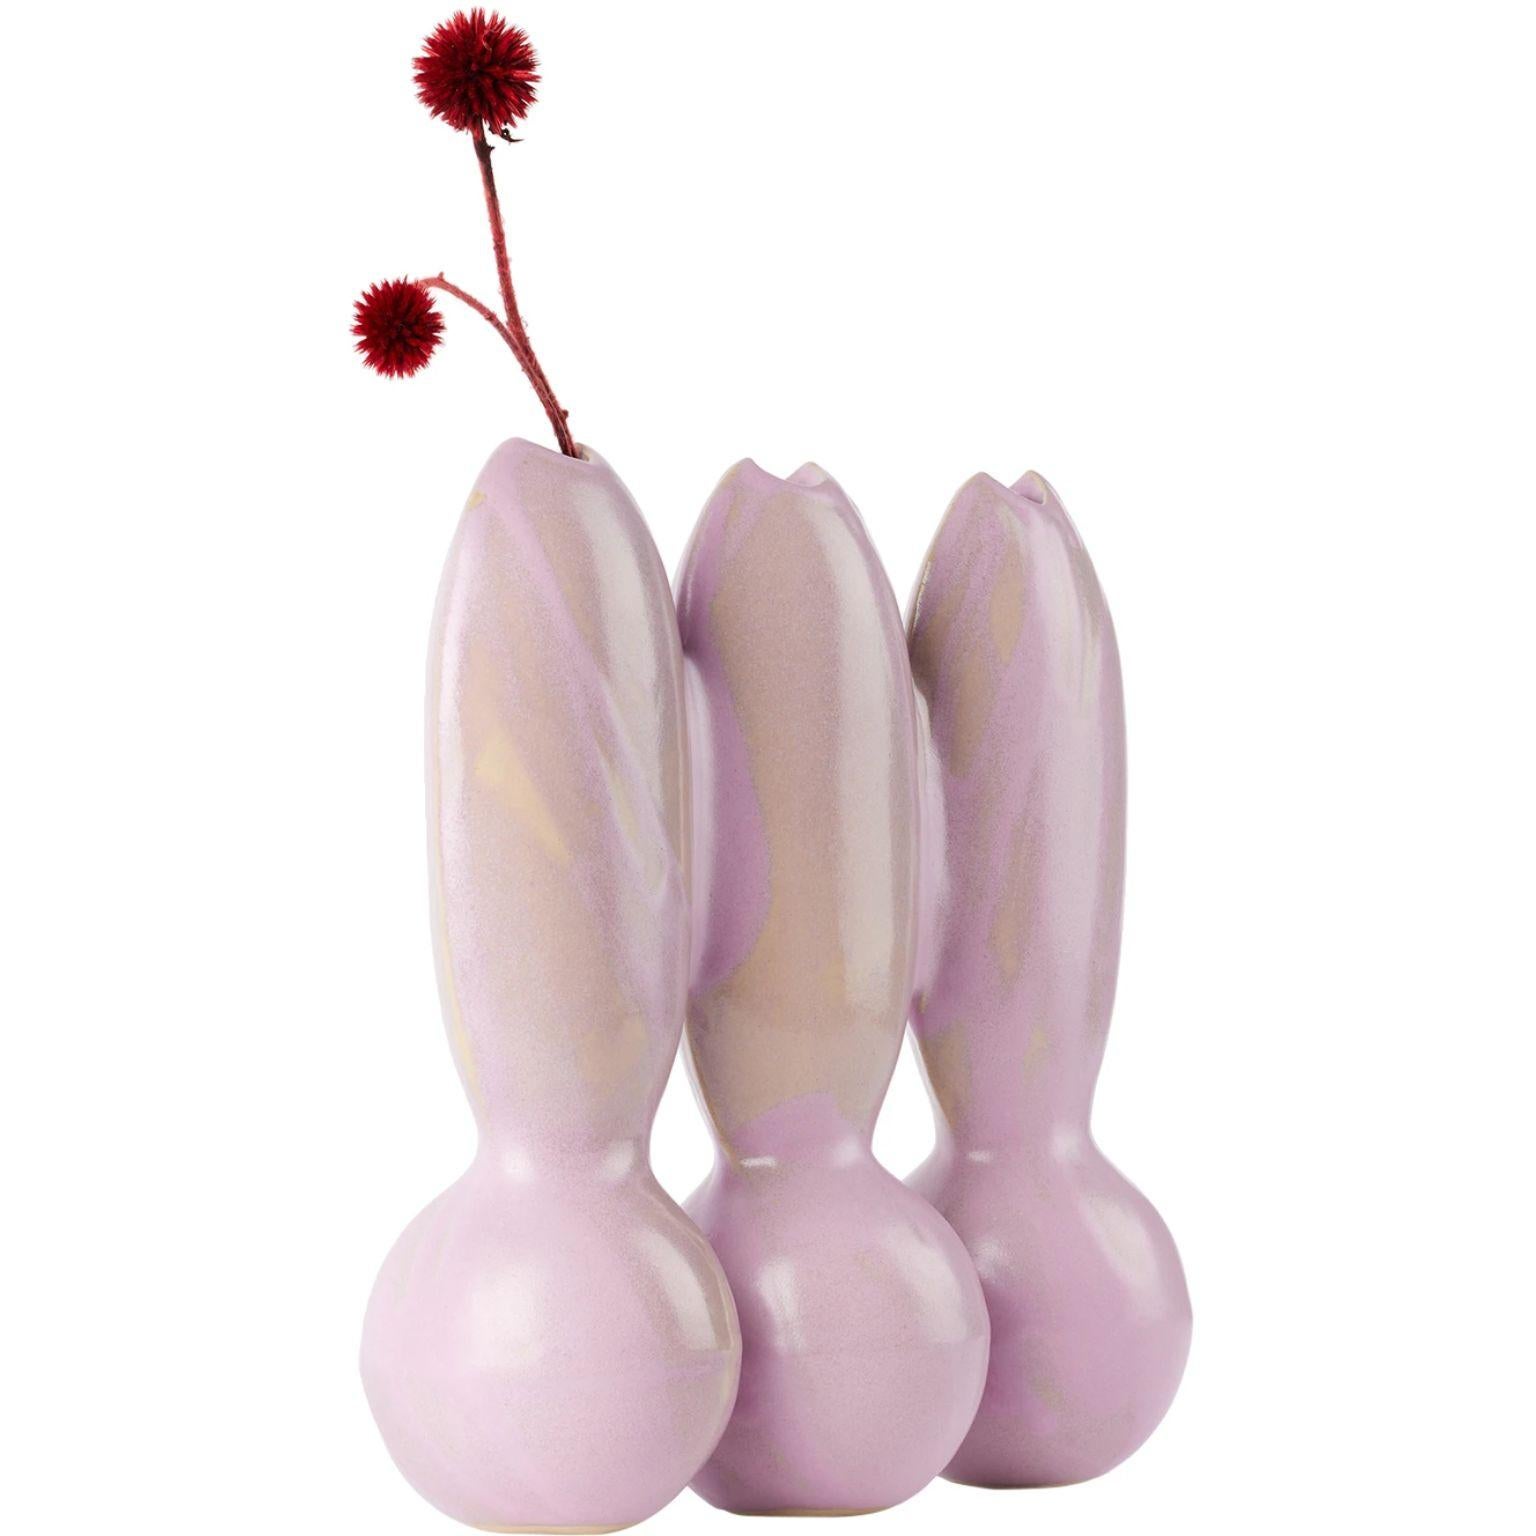 Itera Lilac Pink Triple Vase by Ia Kutateladze
One Of  A Kind.
Dimensions: D 10 x W 30 x H 27 cm.
Materials: Clay.

Handcrafted sculptural ceramic vase in black. Three openings at the top. Please note coloration may vary. Each piece is one of a